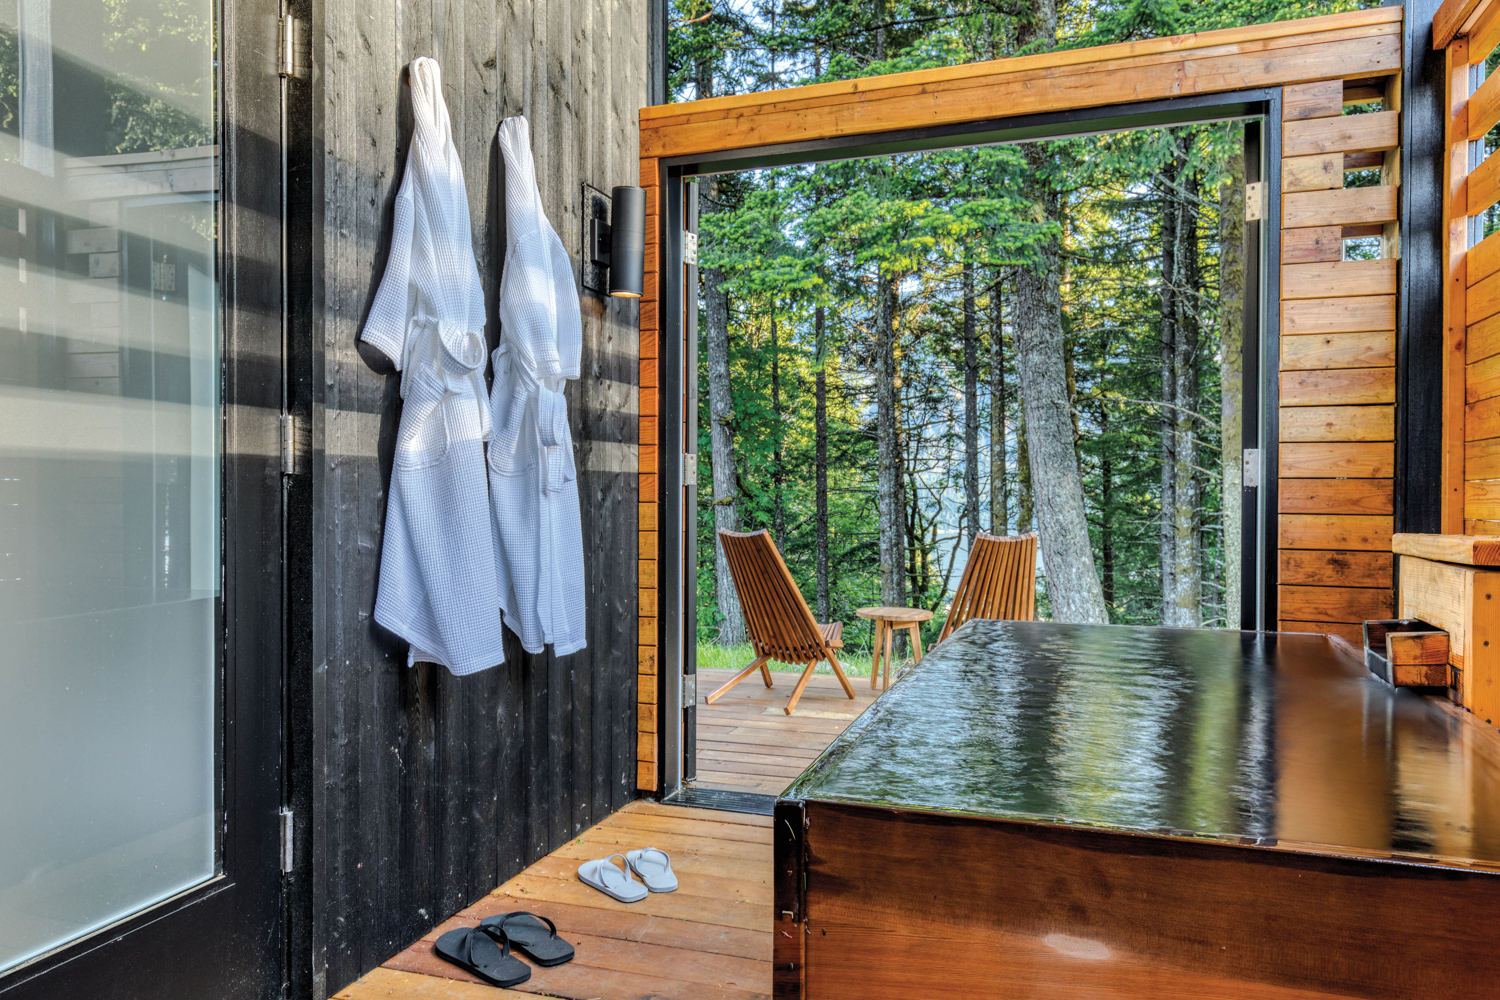 Wood cabin with private soaking tub overlooking forest views at Tenzen Cabins & Springs